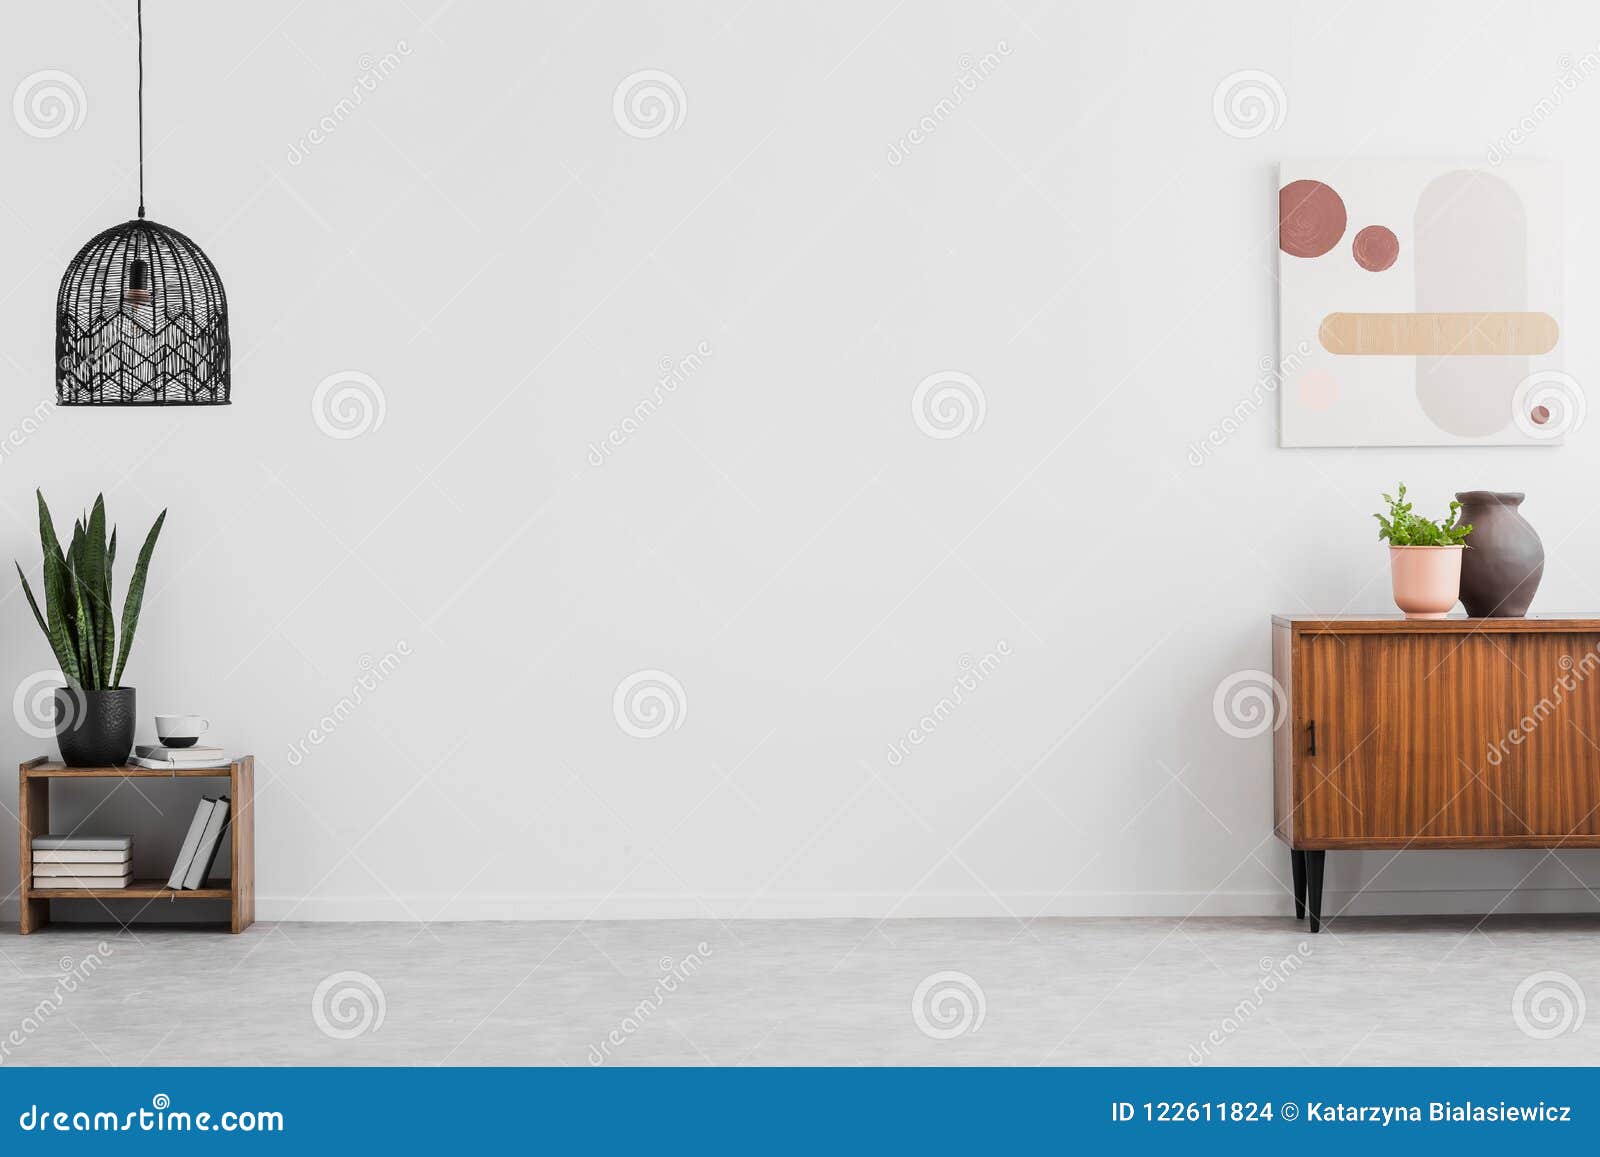 retro, wooden cabinet and a painting in an empty living room interior with white walls and copy space place for a sofa. real photo